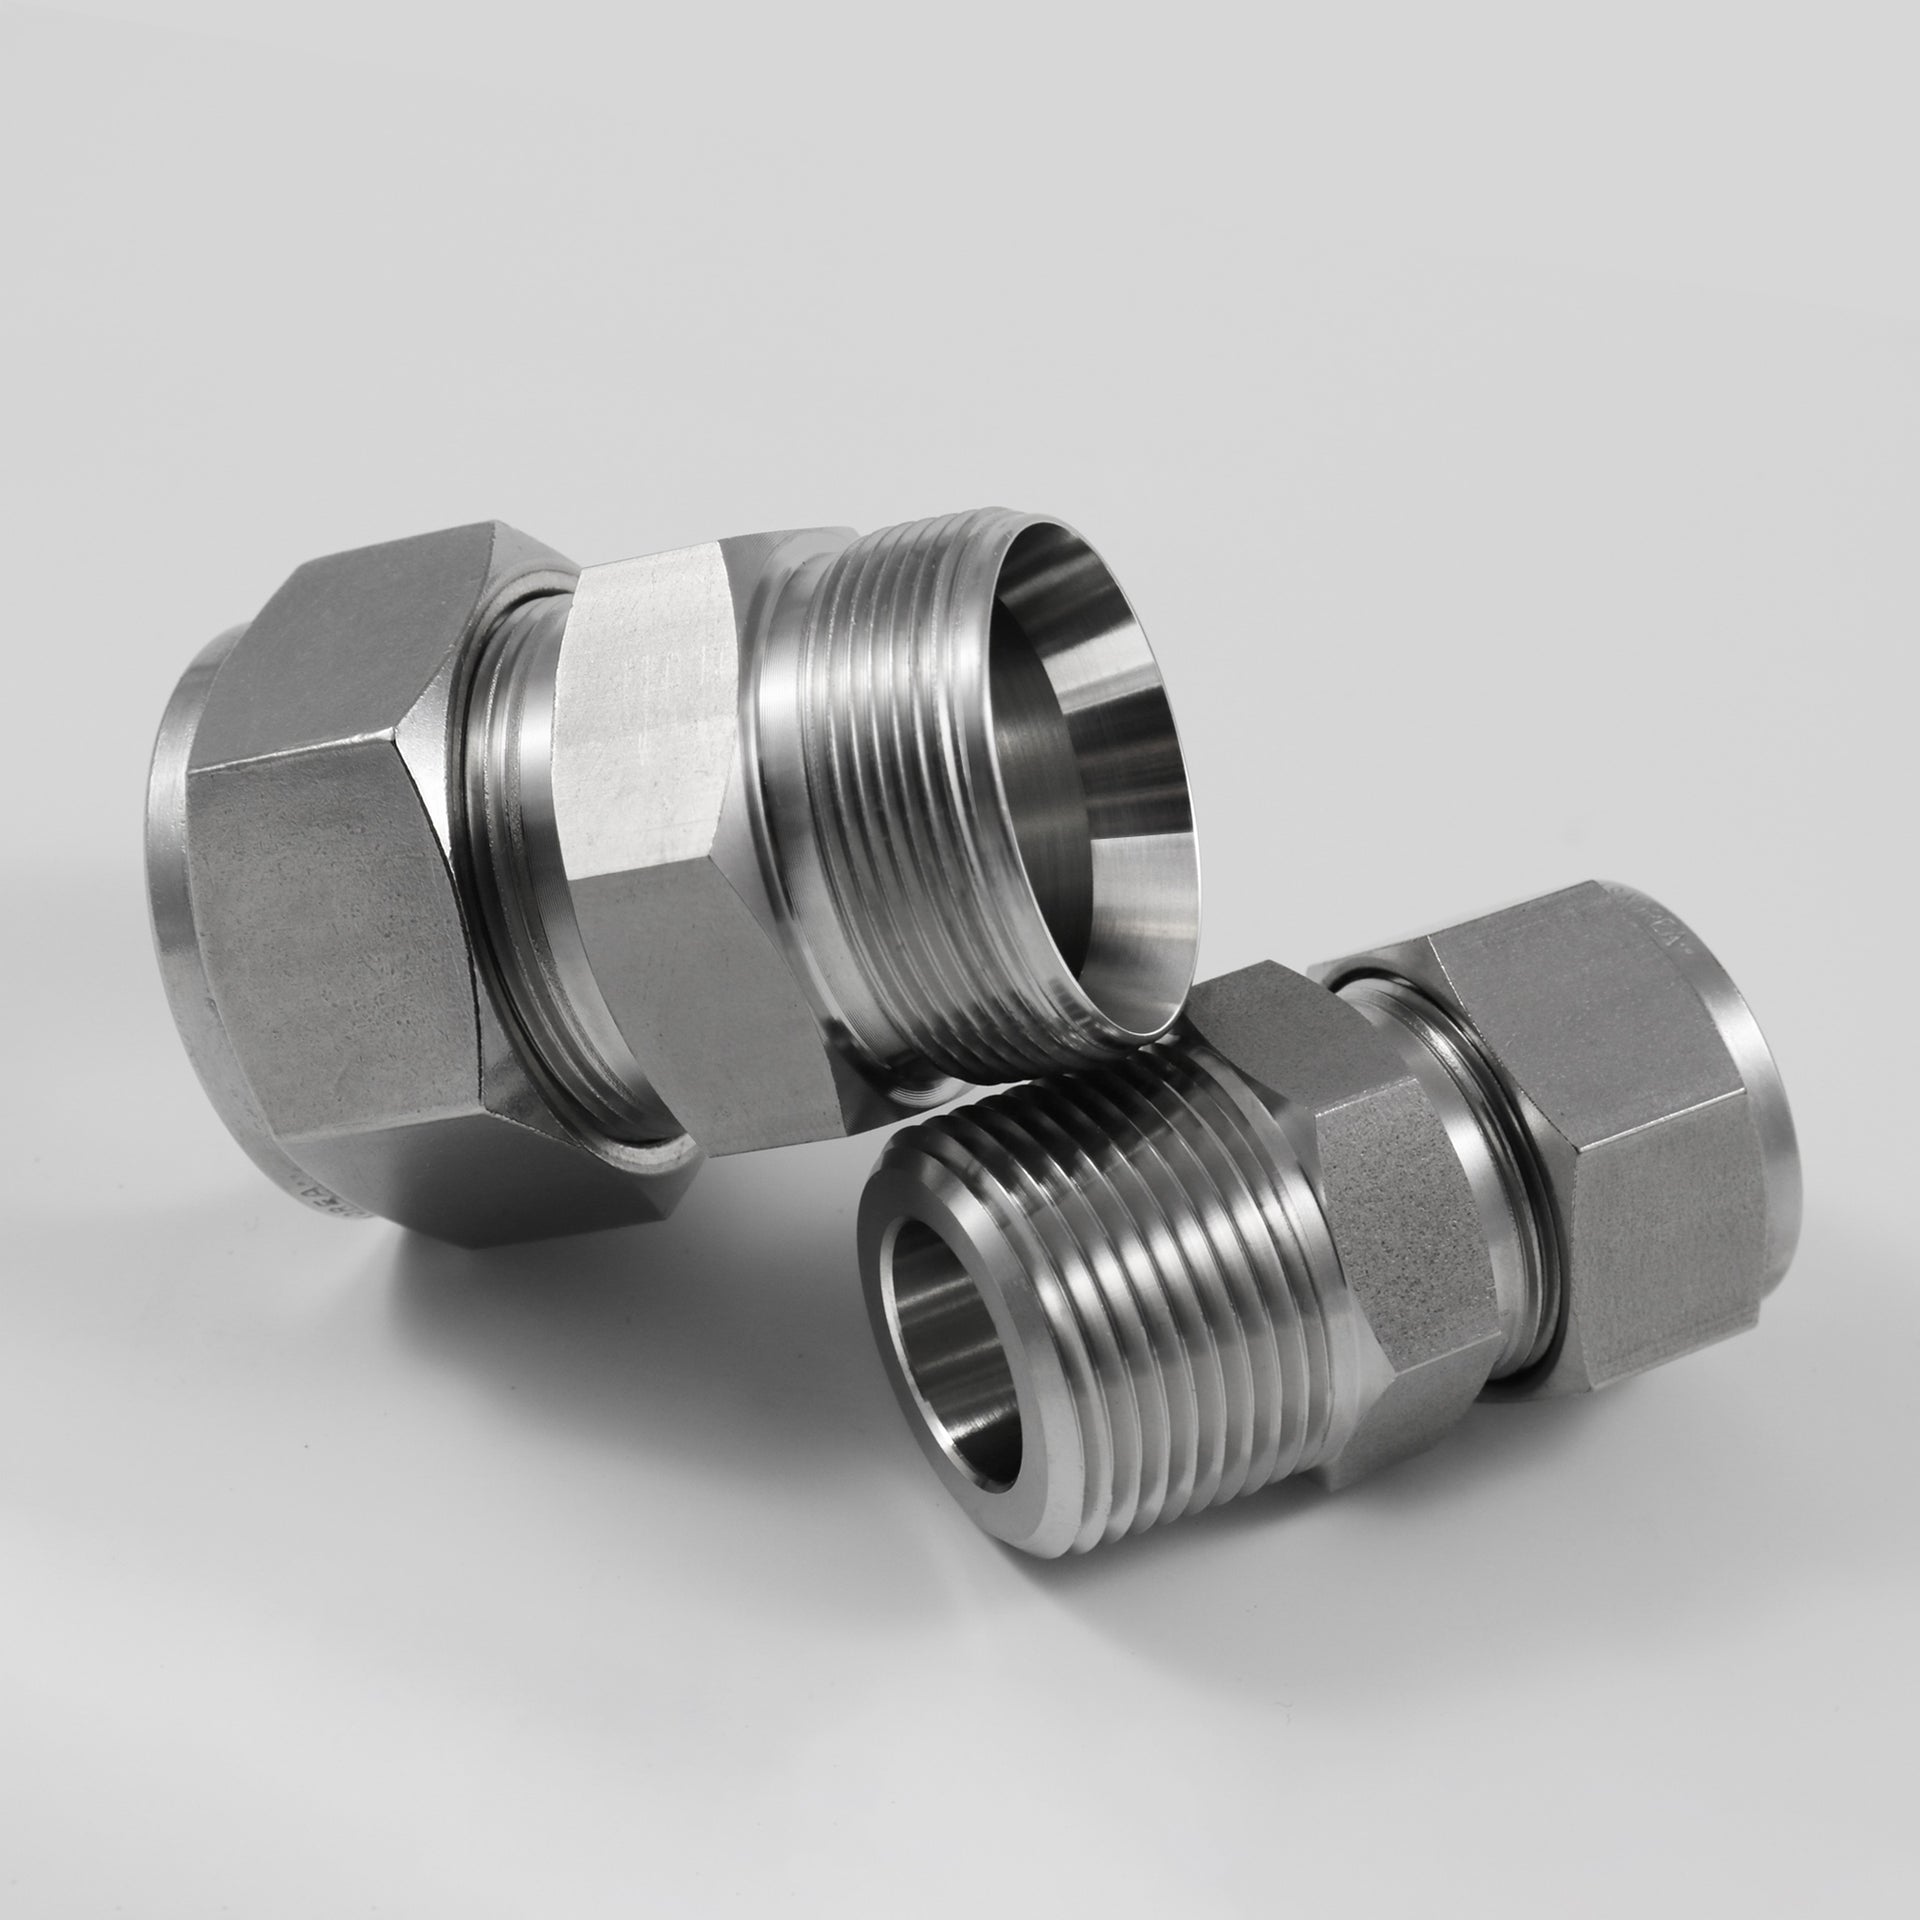 Common Applications for Tube Fittings: Essential Components in Diverse Industries